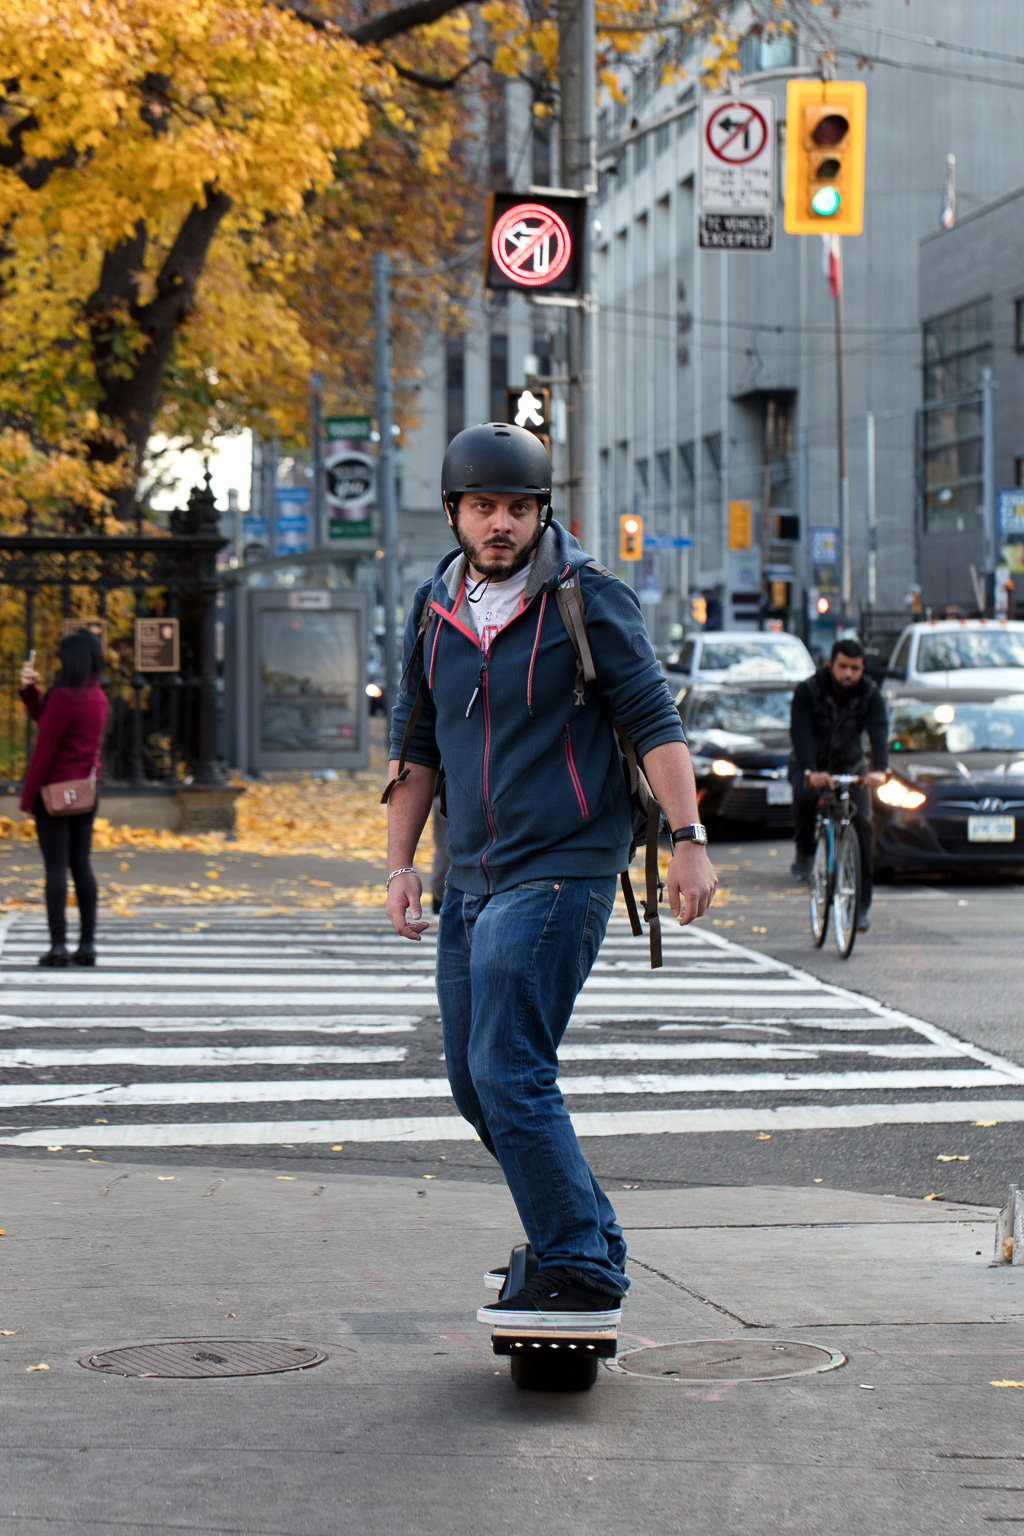 Young man rides board across University Avenue on Queen West in Toronto.